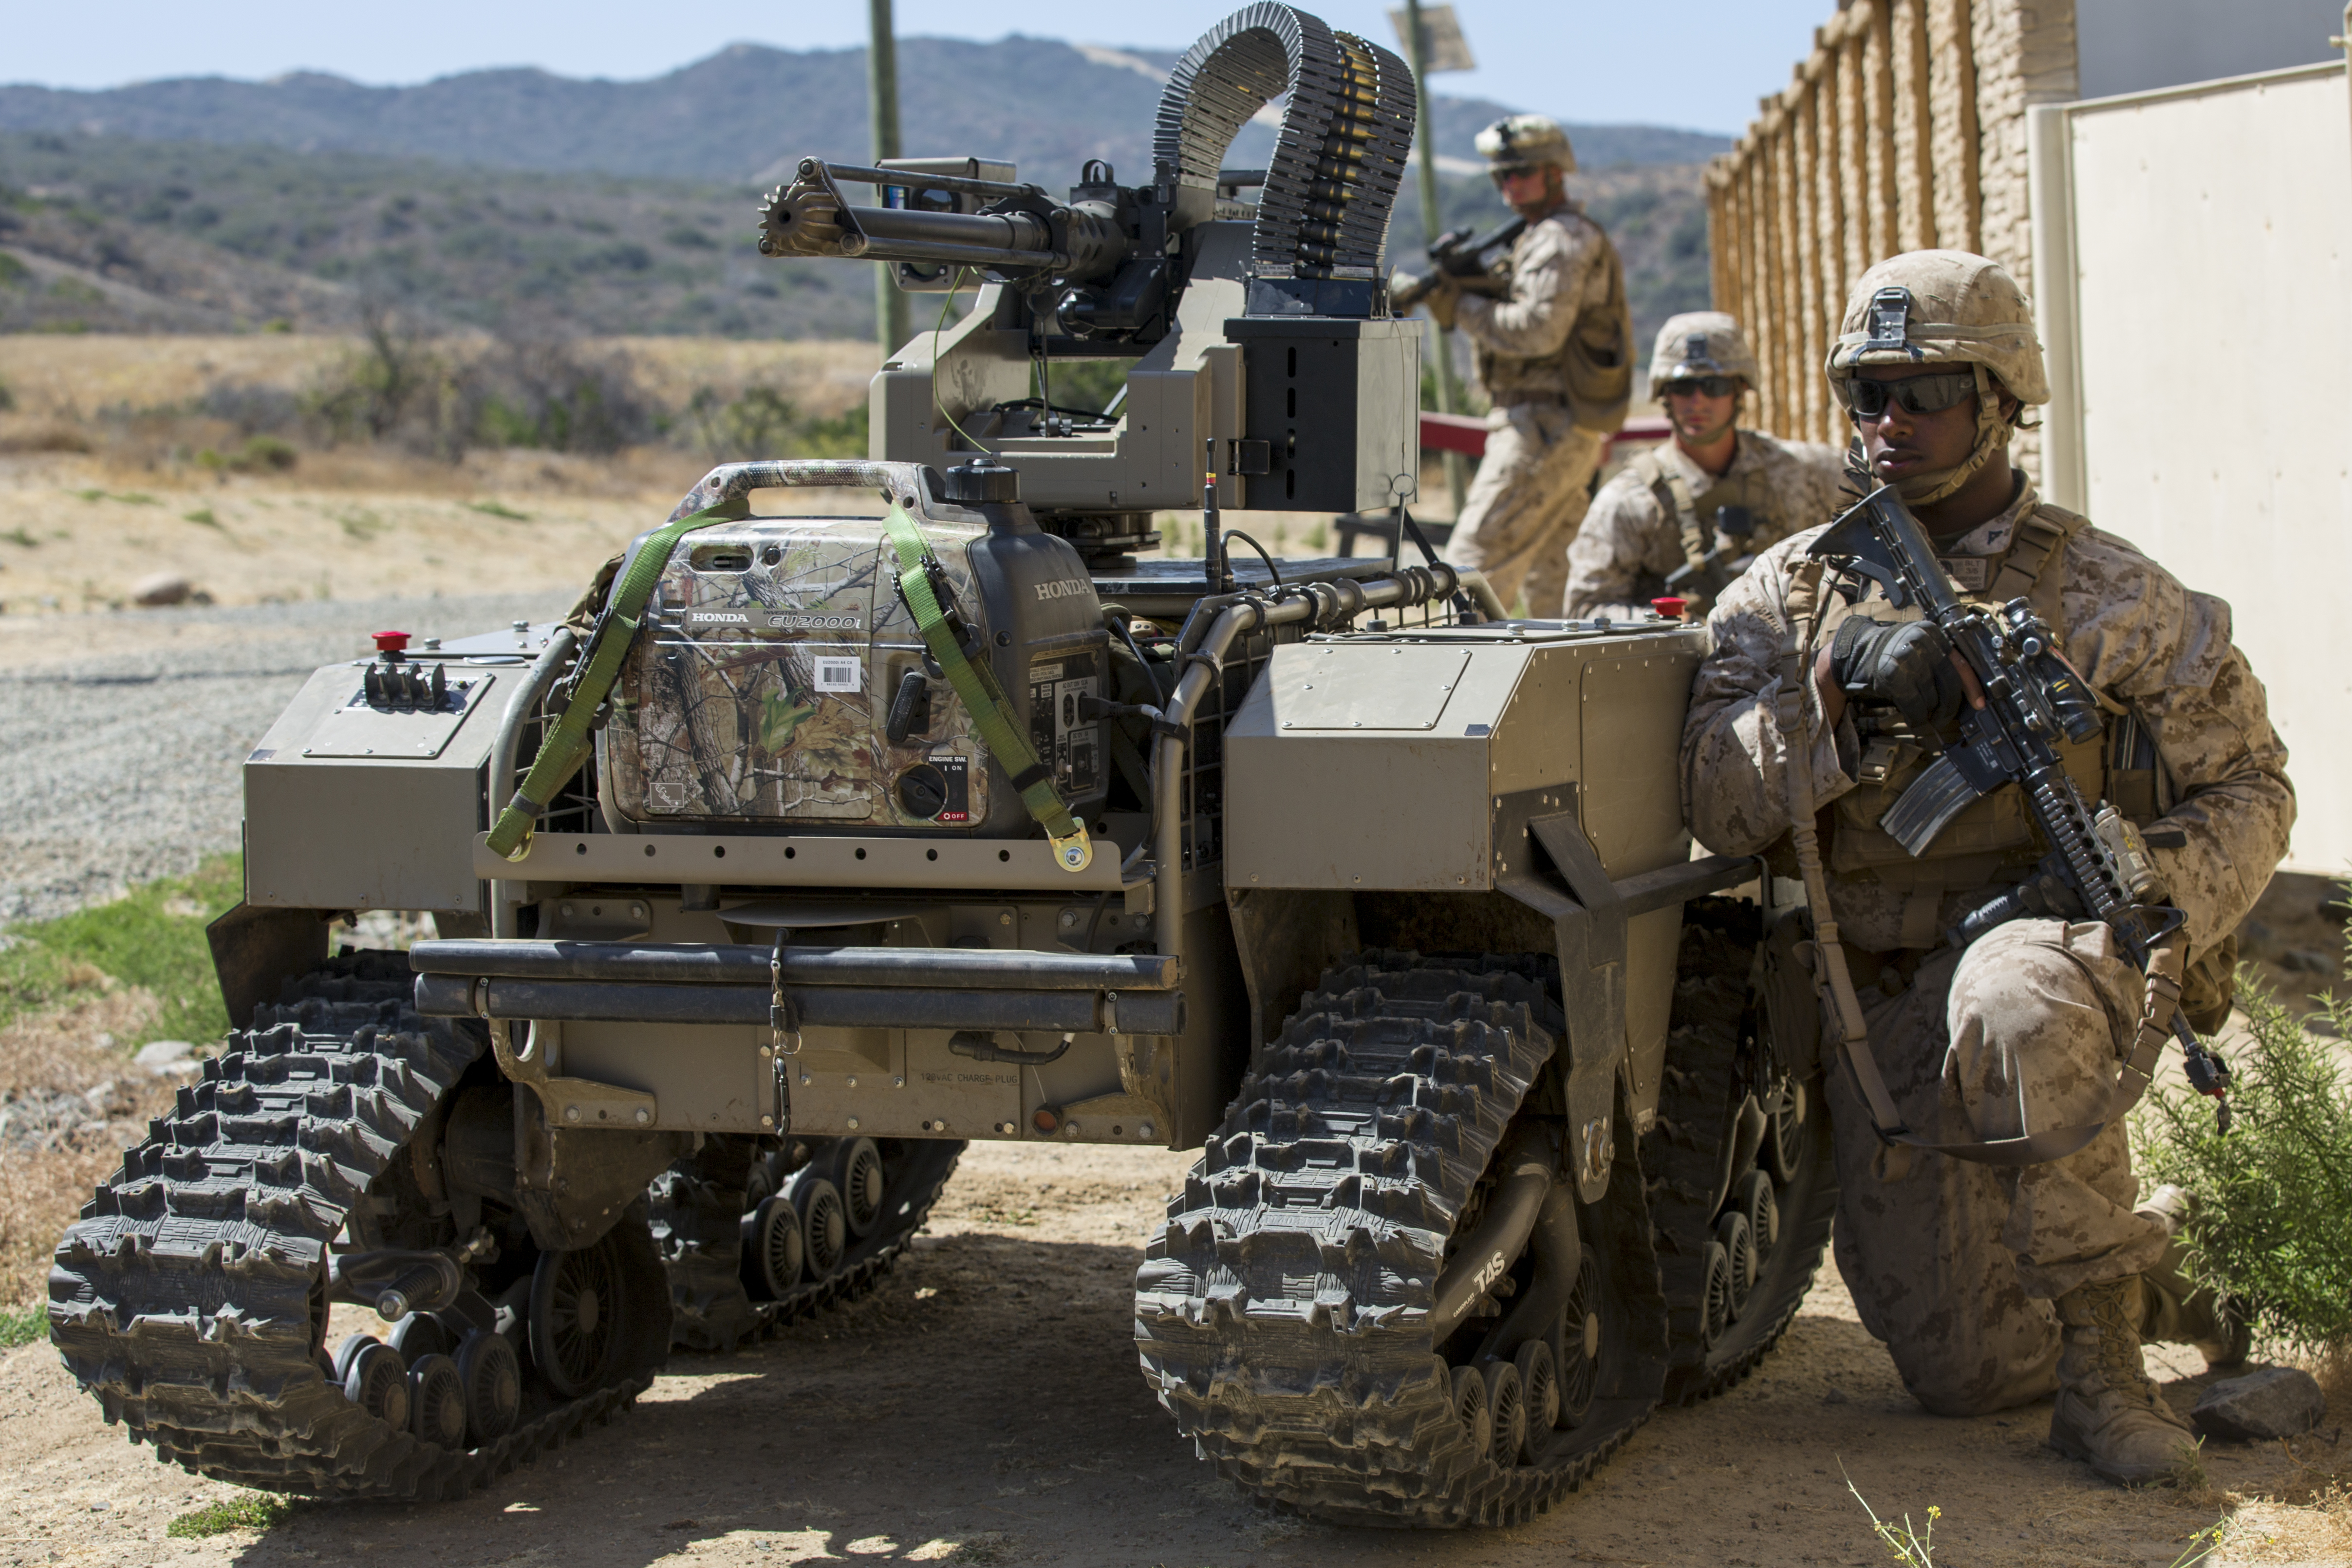 U.S. Marine Lance Cpl. Deonce Cushinberry, a rifleman with Kilo Company, 3rd Battalion, 5th Marines Regiment, takes cover from simulated enemies behind a Weaponized Multi-Utility Tactical Transport vehicle, a multifunction force multiplier configured to persist, protect and project the small unit, during an exercise for Marine Corps Warfighting Laboratory Marine Air-Ground Task Force Integrated Experiment on Camp Pendleton, Calif., July 13, 2016. US Marine Corps photo.